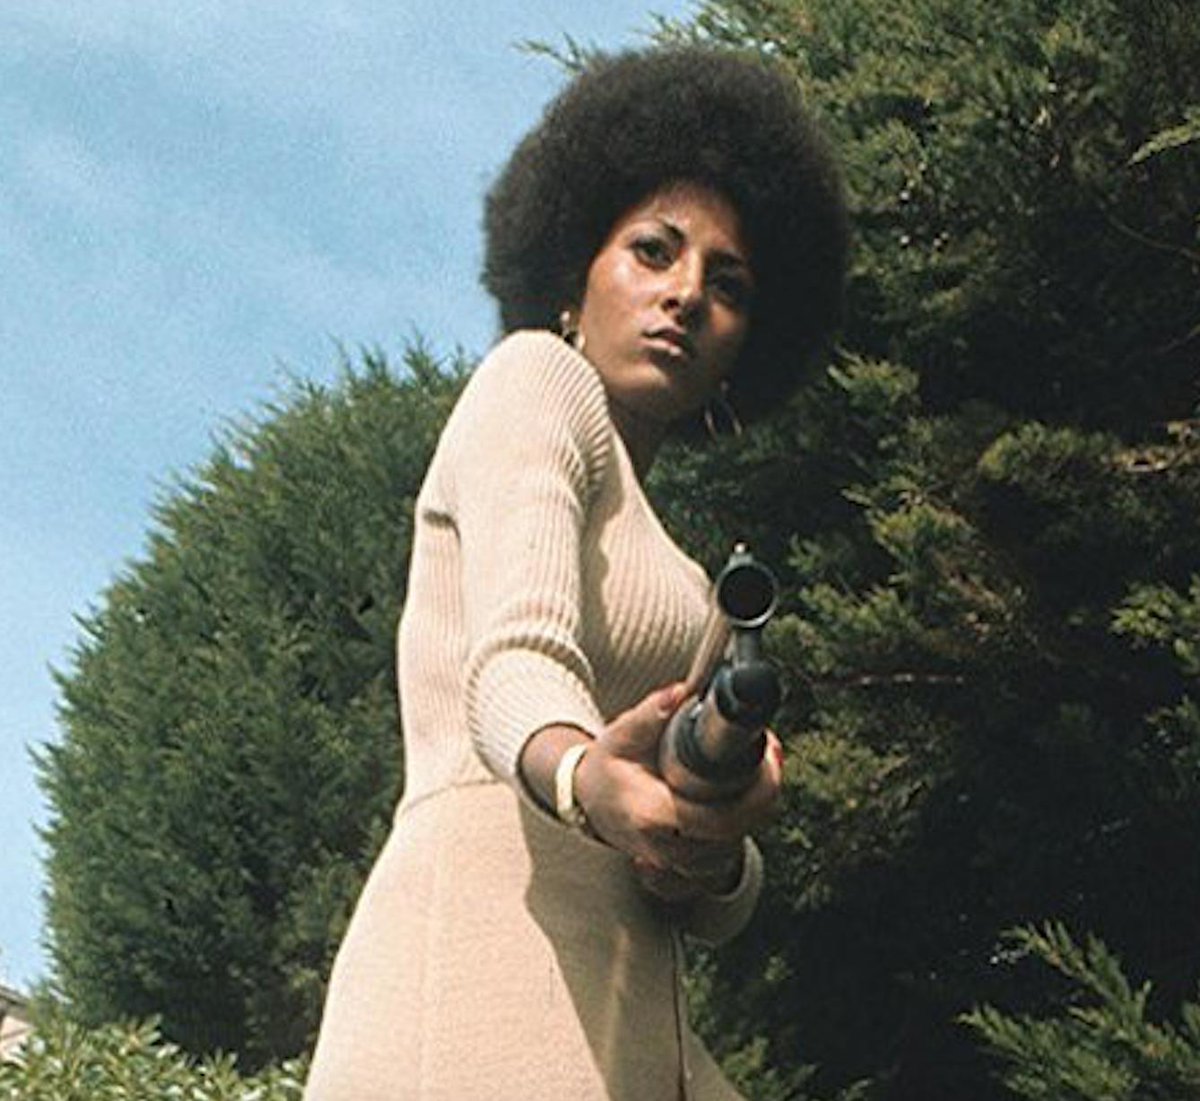 You have bought a ticket for the screening of Coffy (1973) (w/PAM GRIER, so...